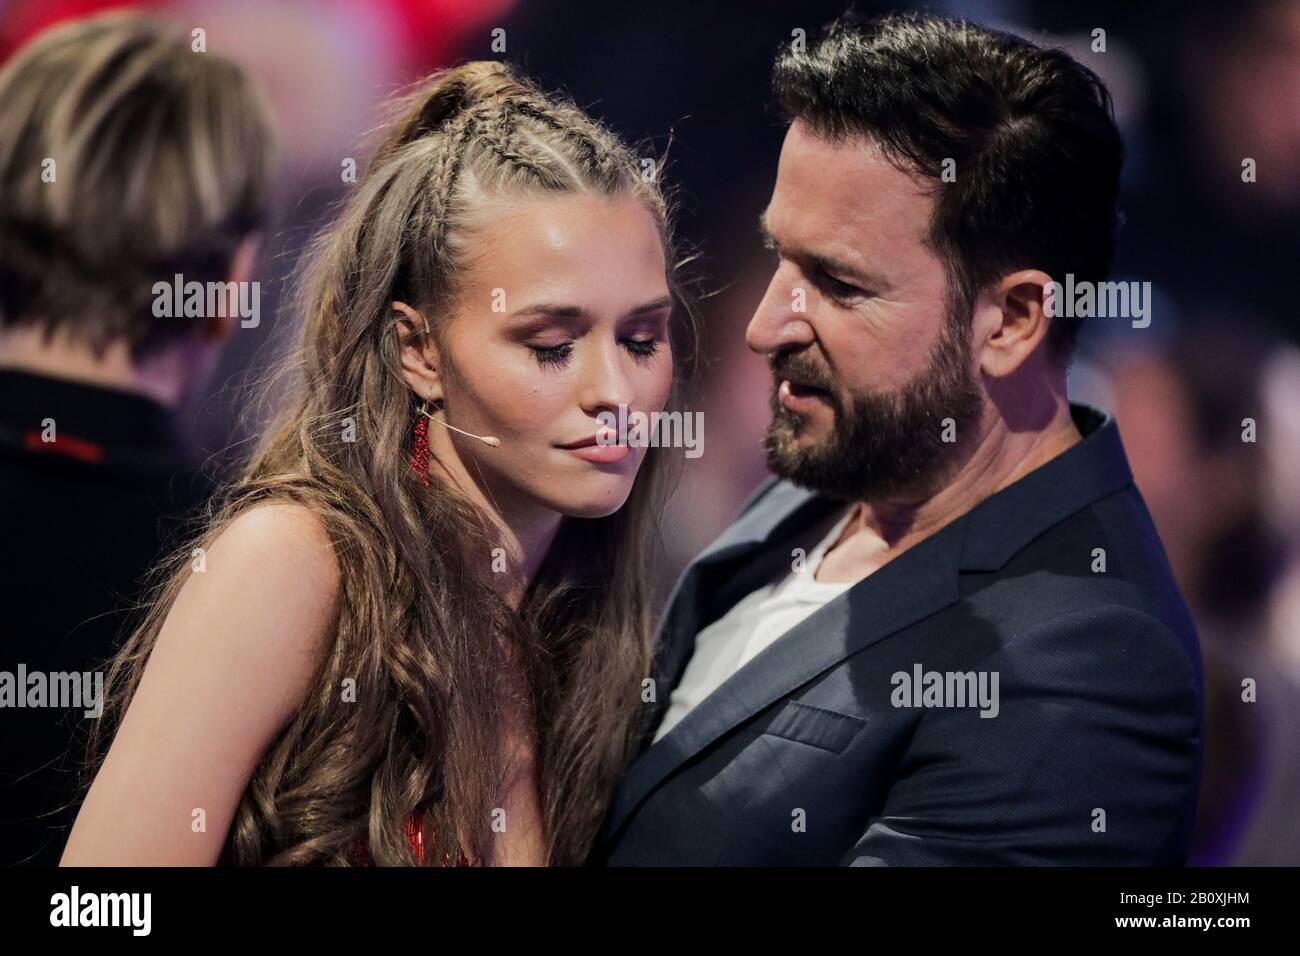 Cologne Germany 21st Feb 2020 Laura Muller Tv Personality And Michael Wendler Singer Talk To Each